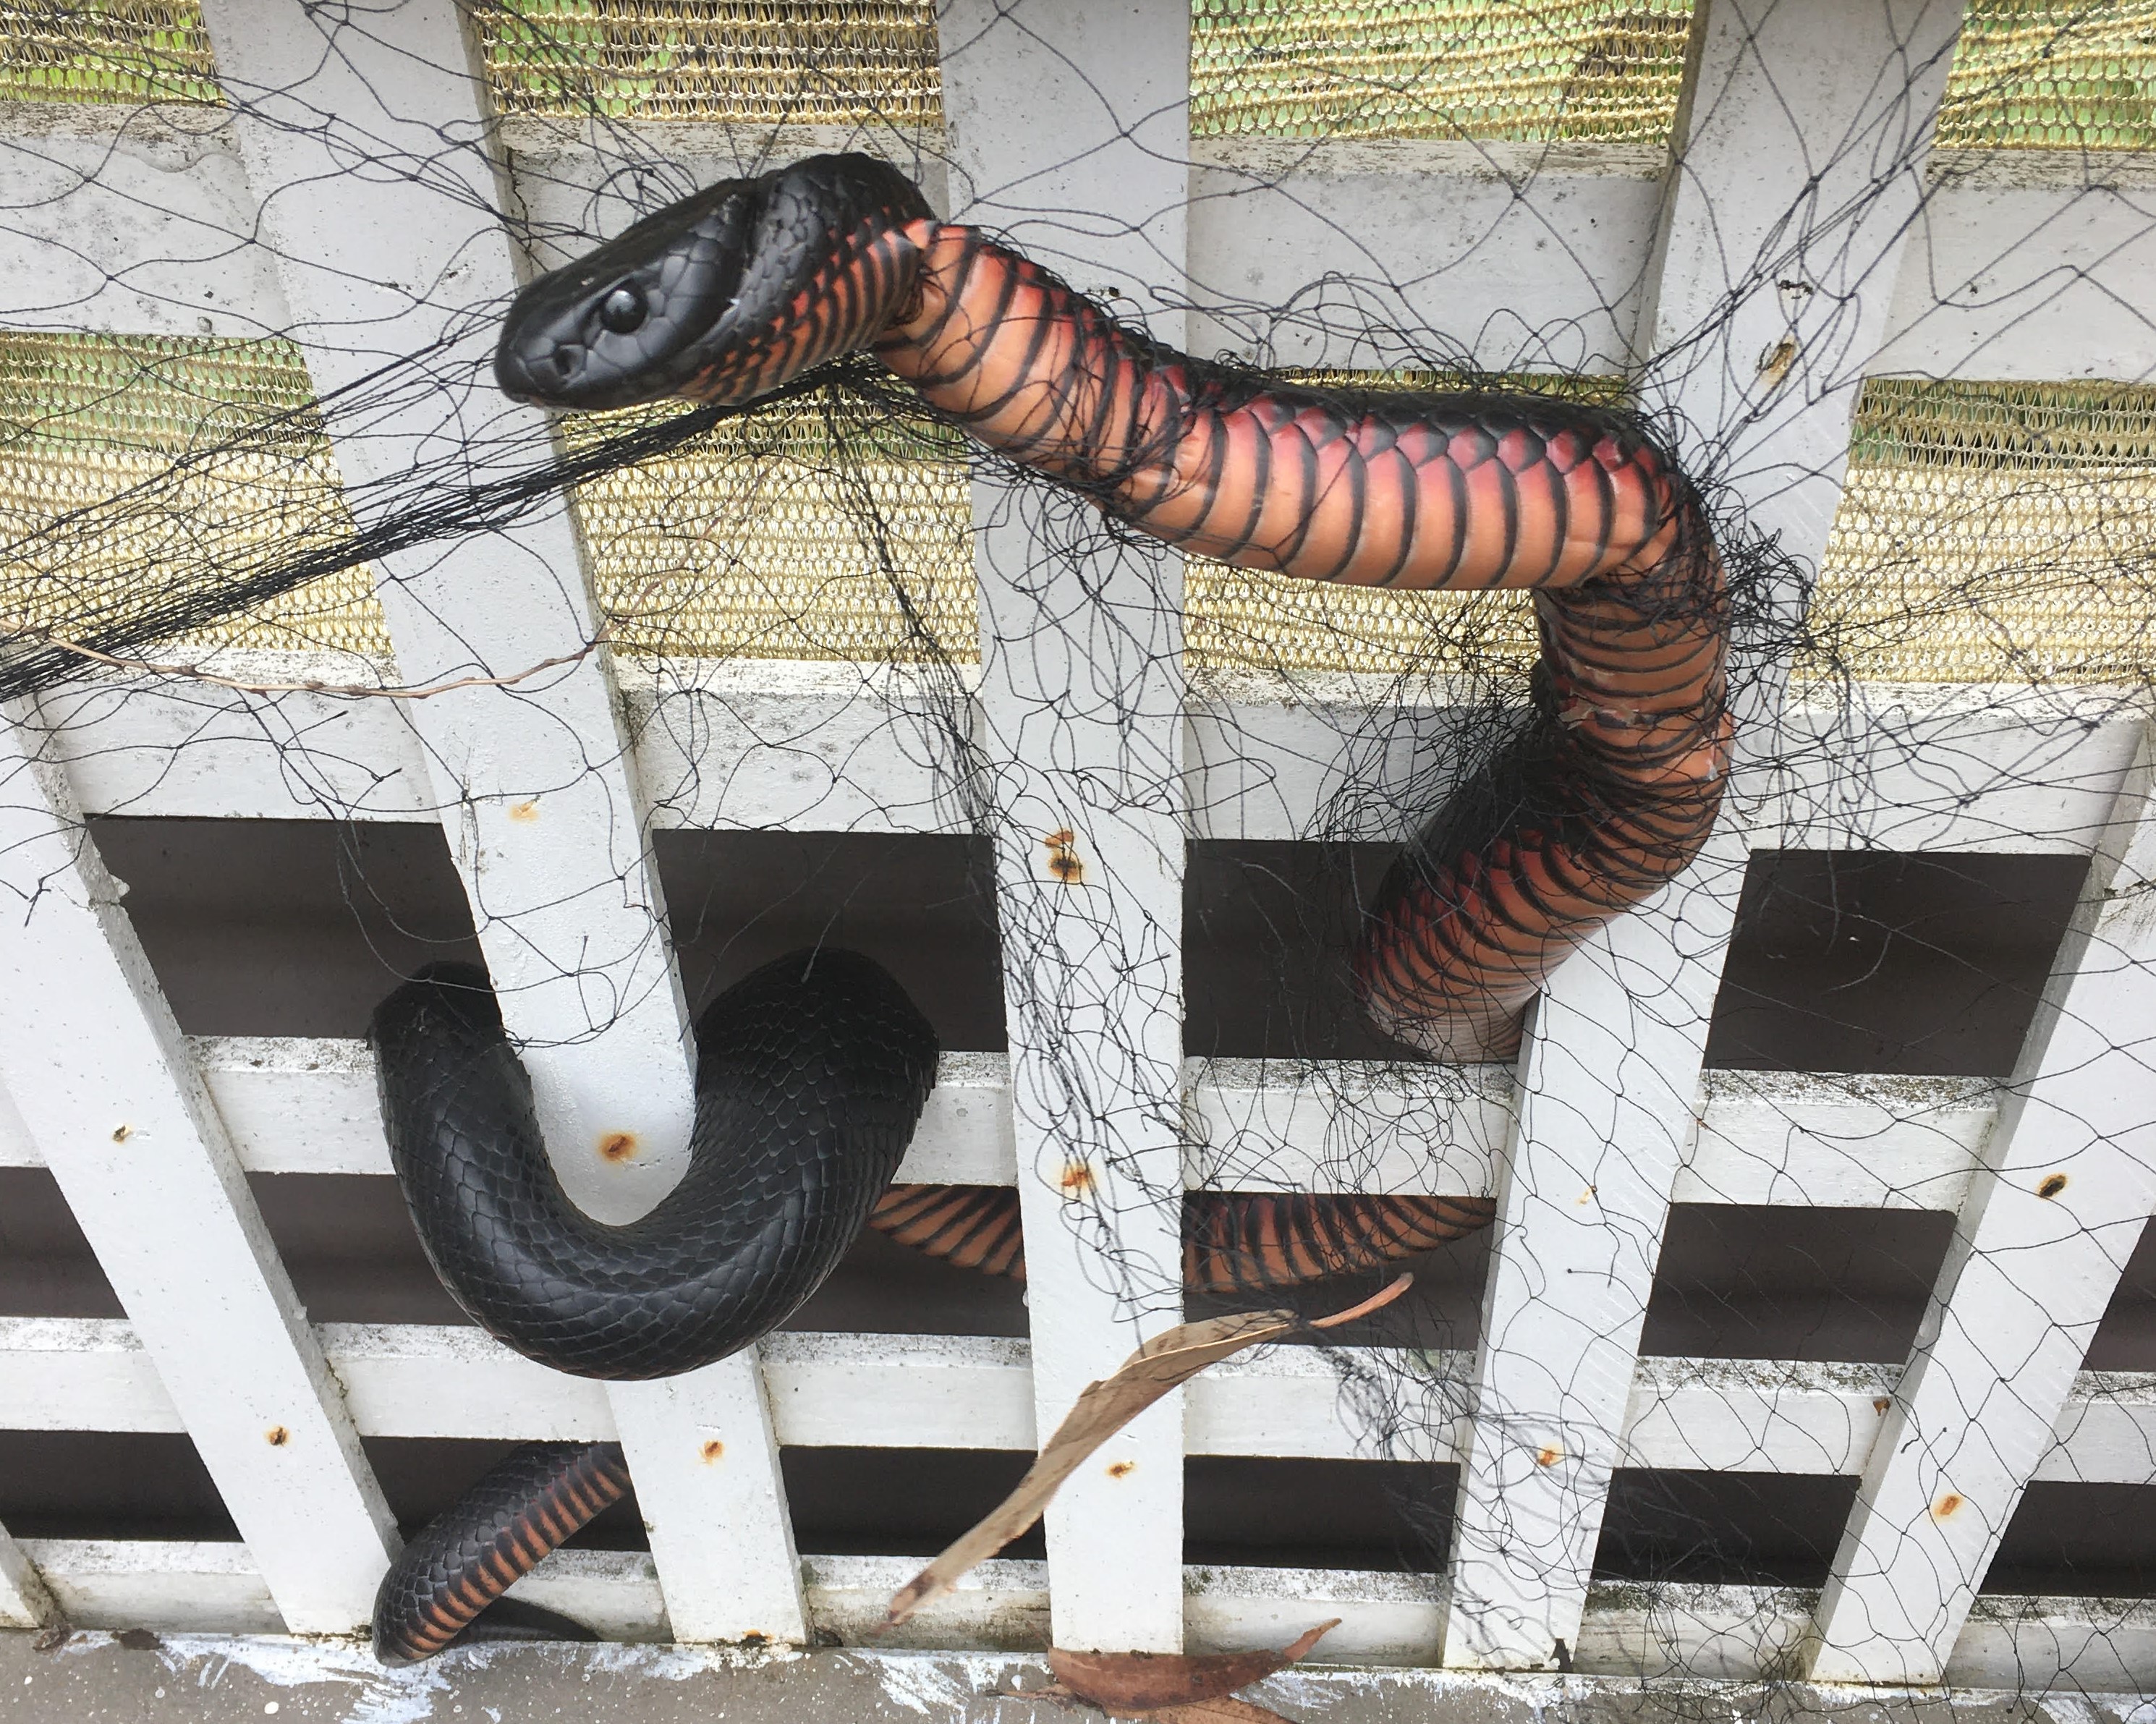 Red-bellied black snake caught in netting freed by WIRES